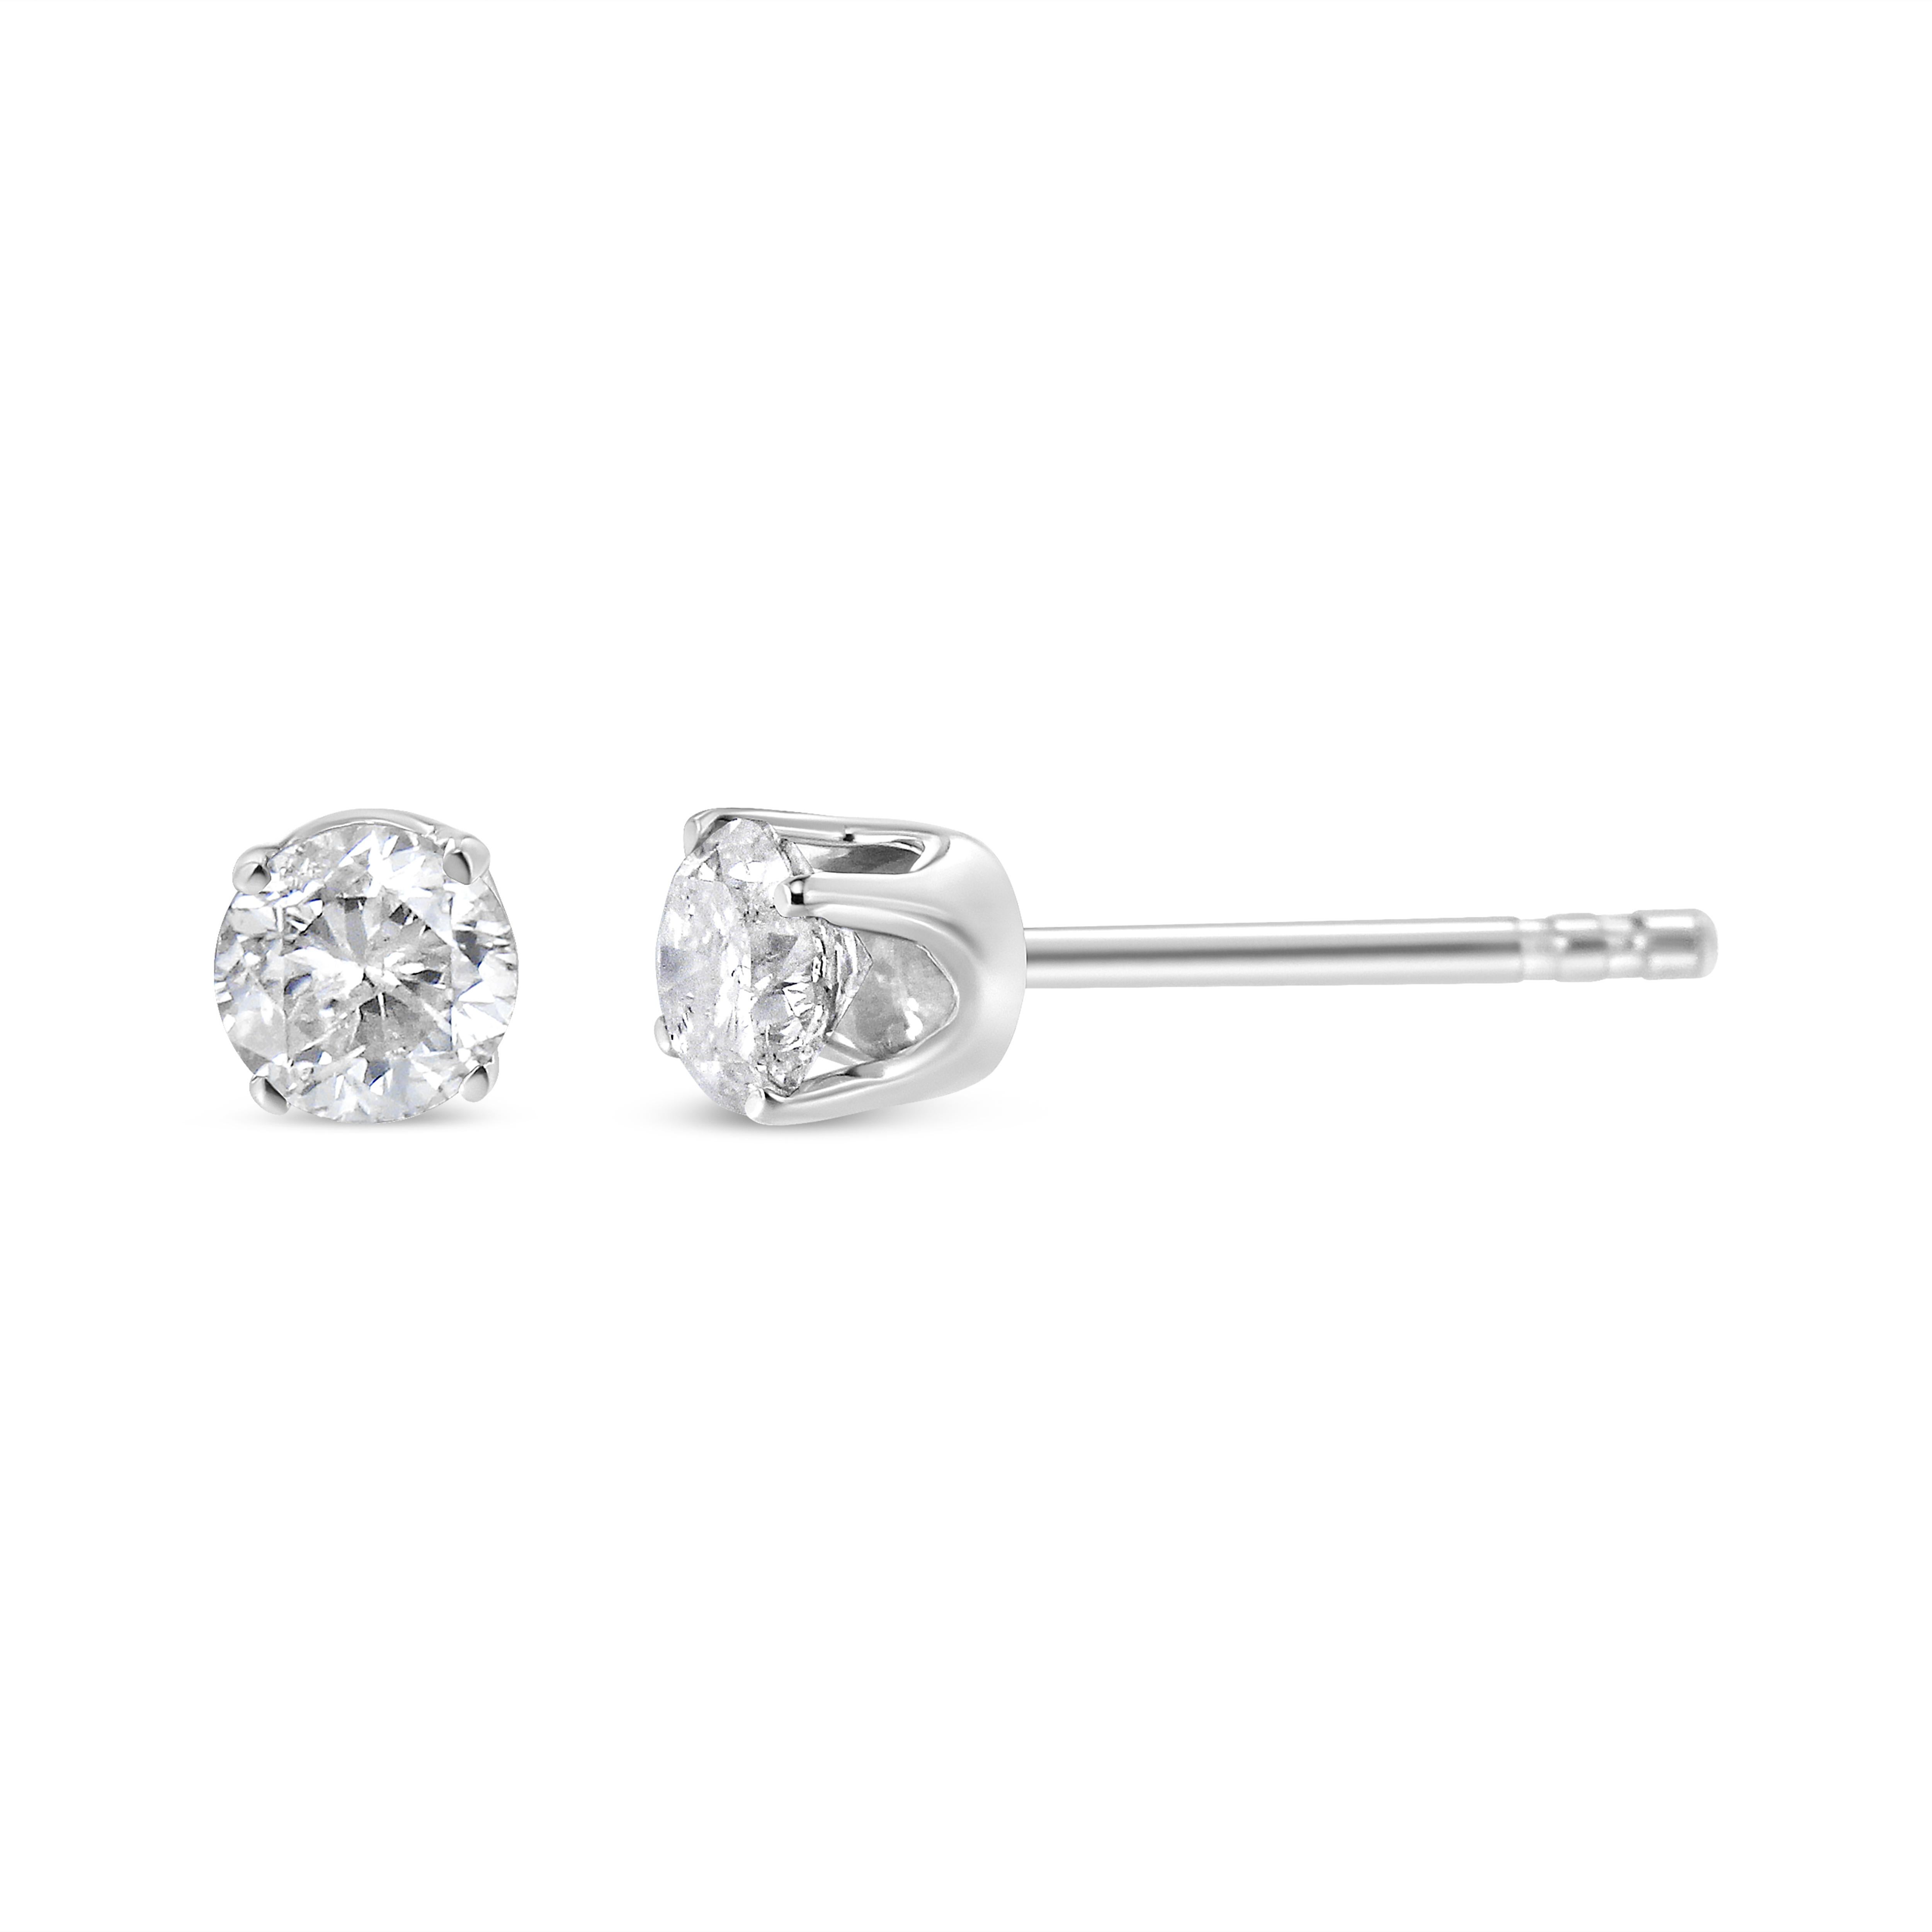 Round Cut AGS Certified 14K White Gold 1.0 Carat Brilliant Round-Cut Diamond Stud Earrings For Sale